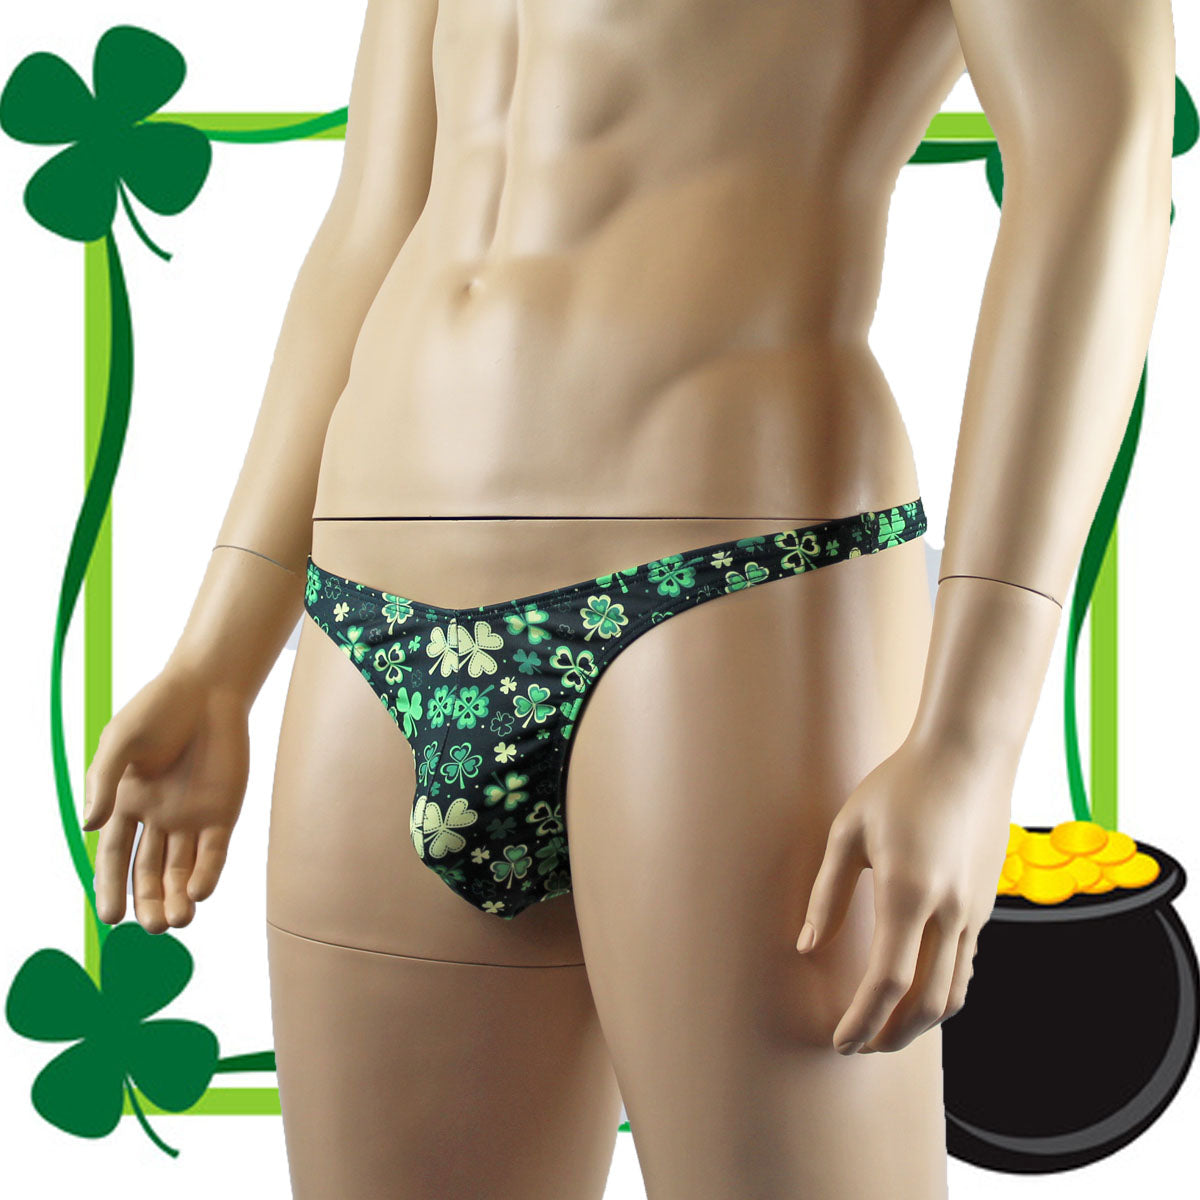 Mens St Patricks Day the Luck of the Irish Thong G string